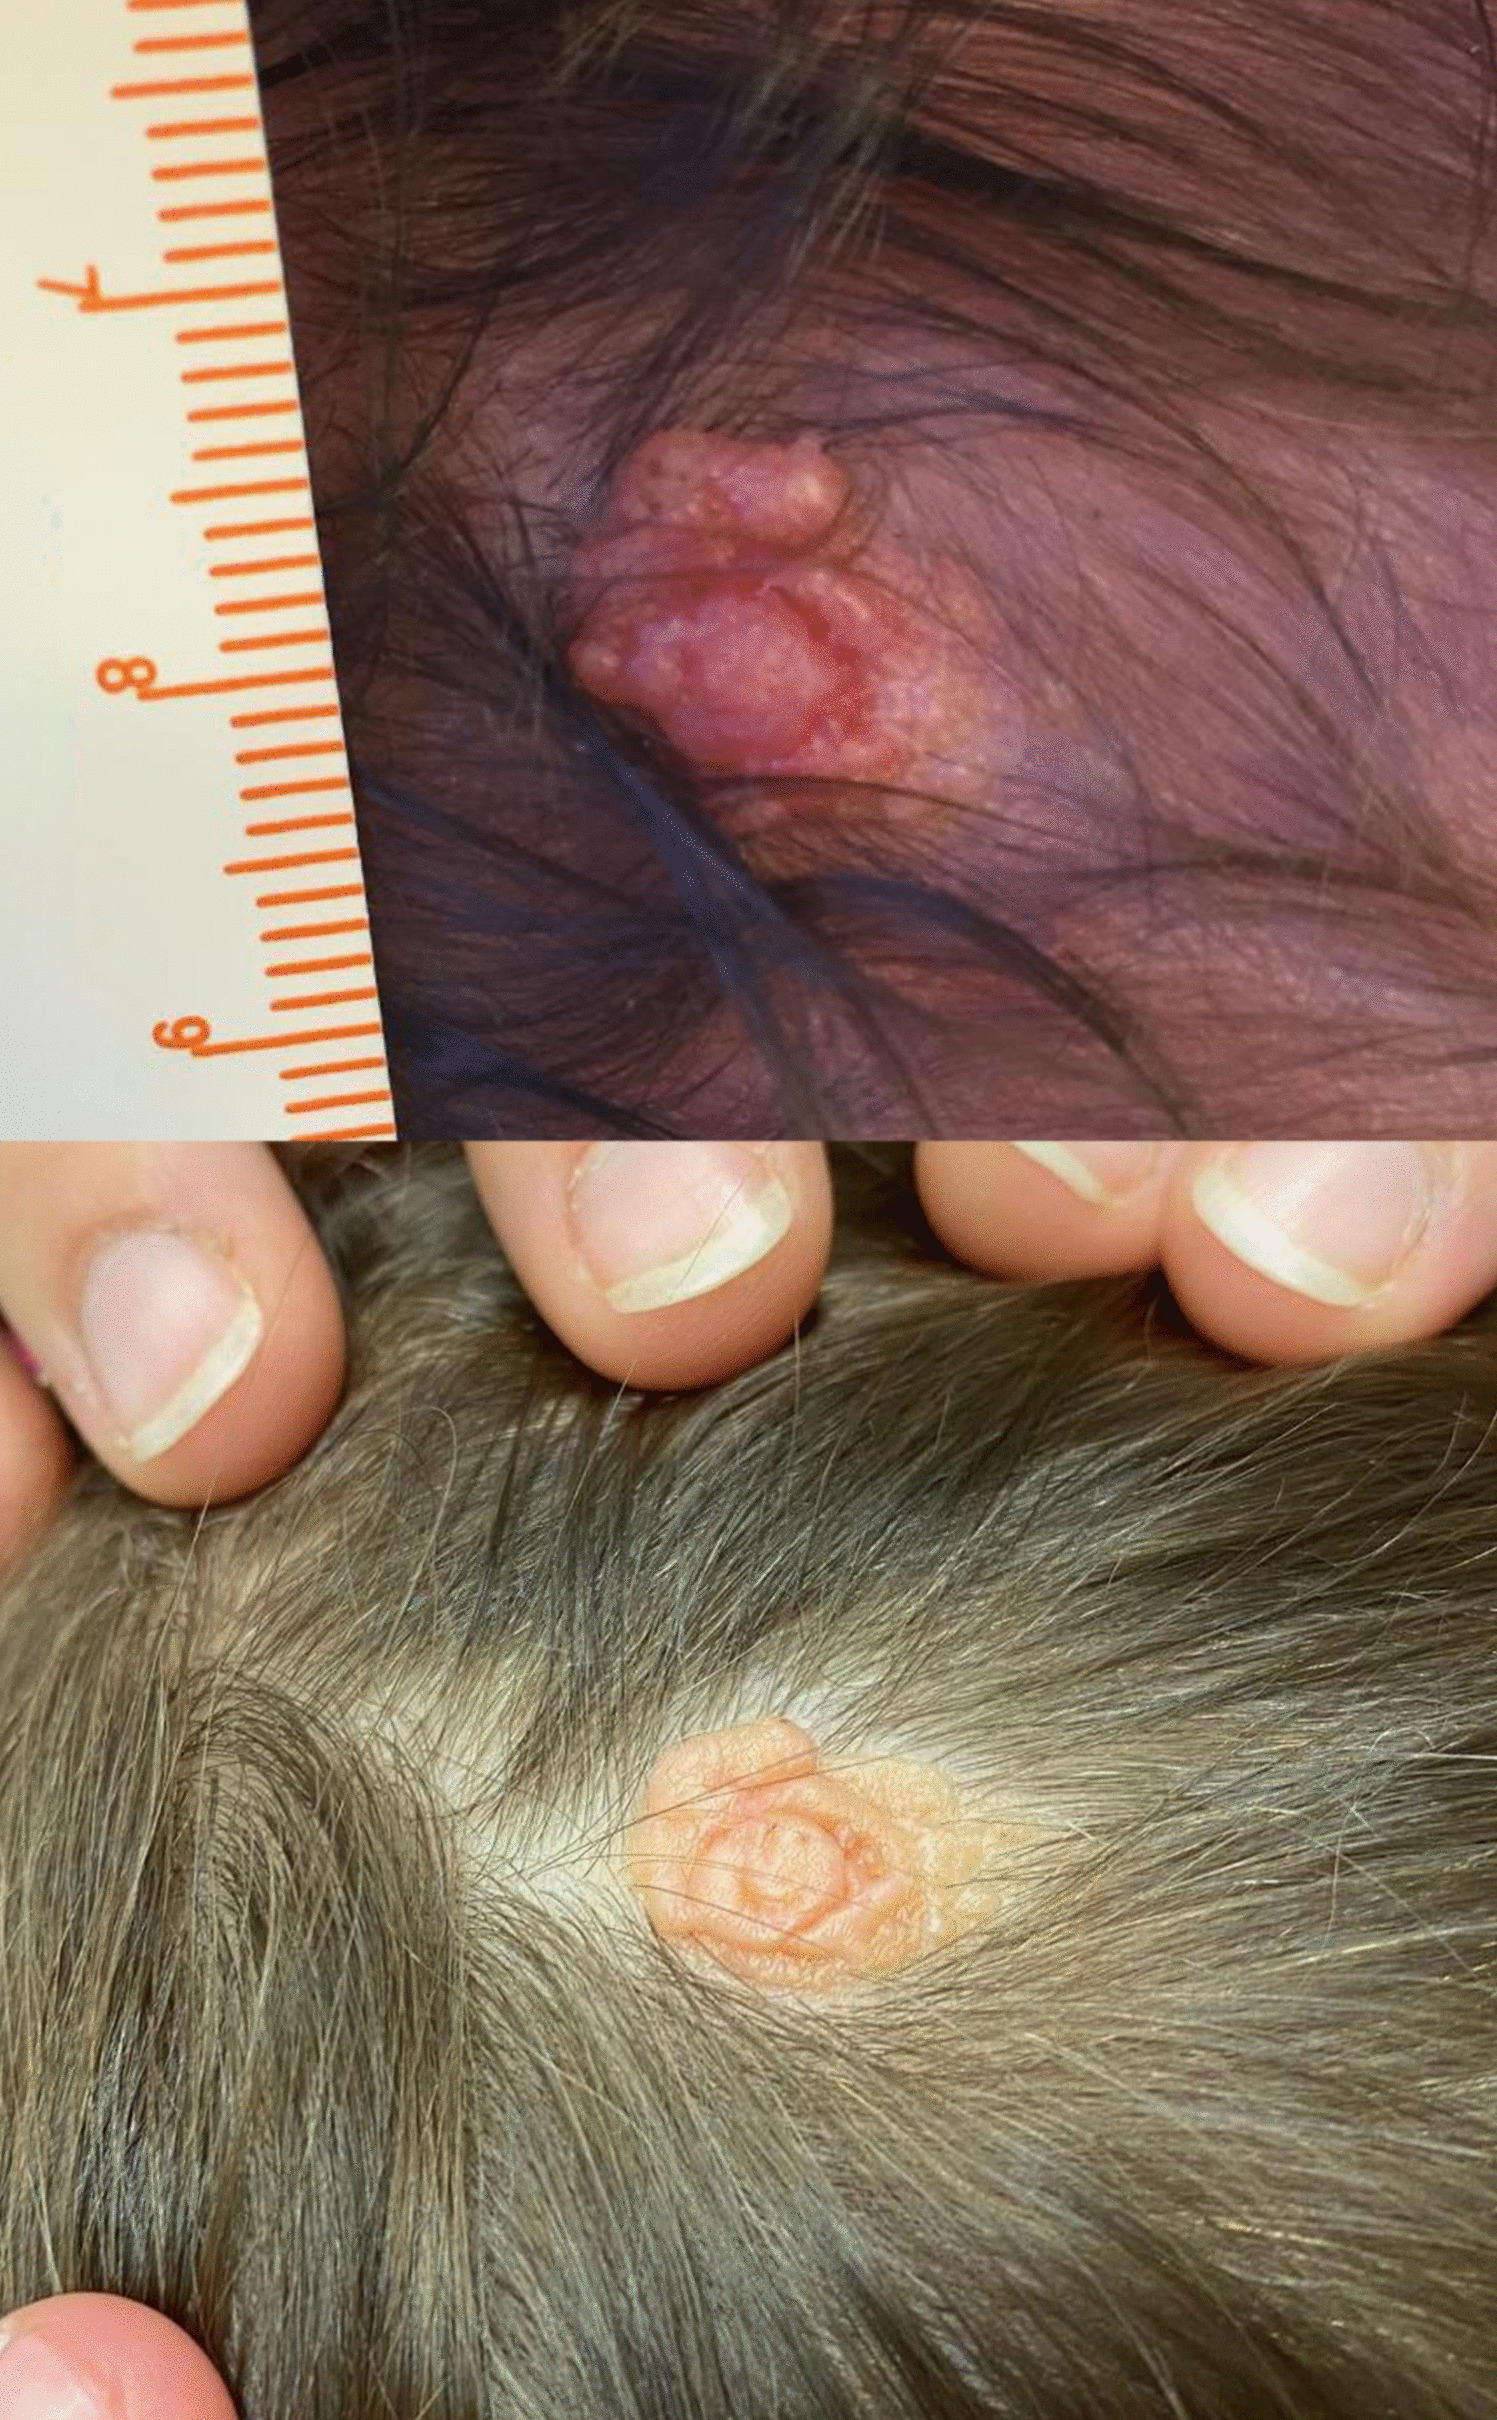 Nevus Sebaceous of Jadassohn’s Misdiagnosed as a Vascular Anomaly: a Pediatric Case Report